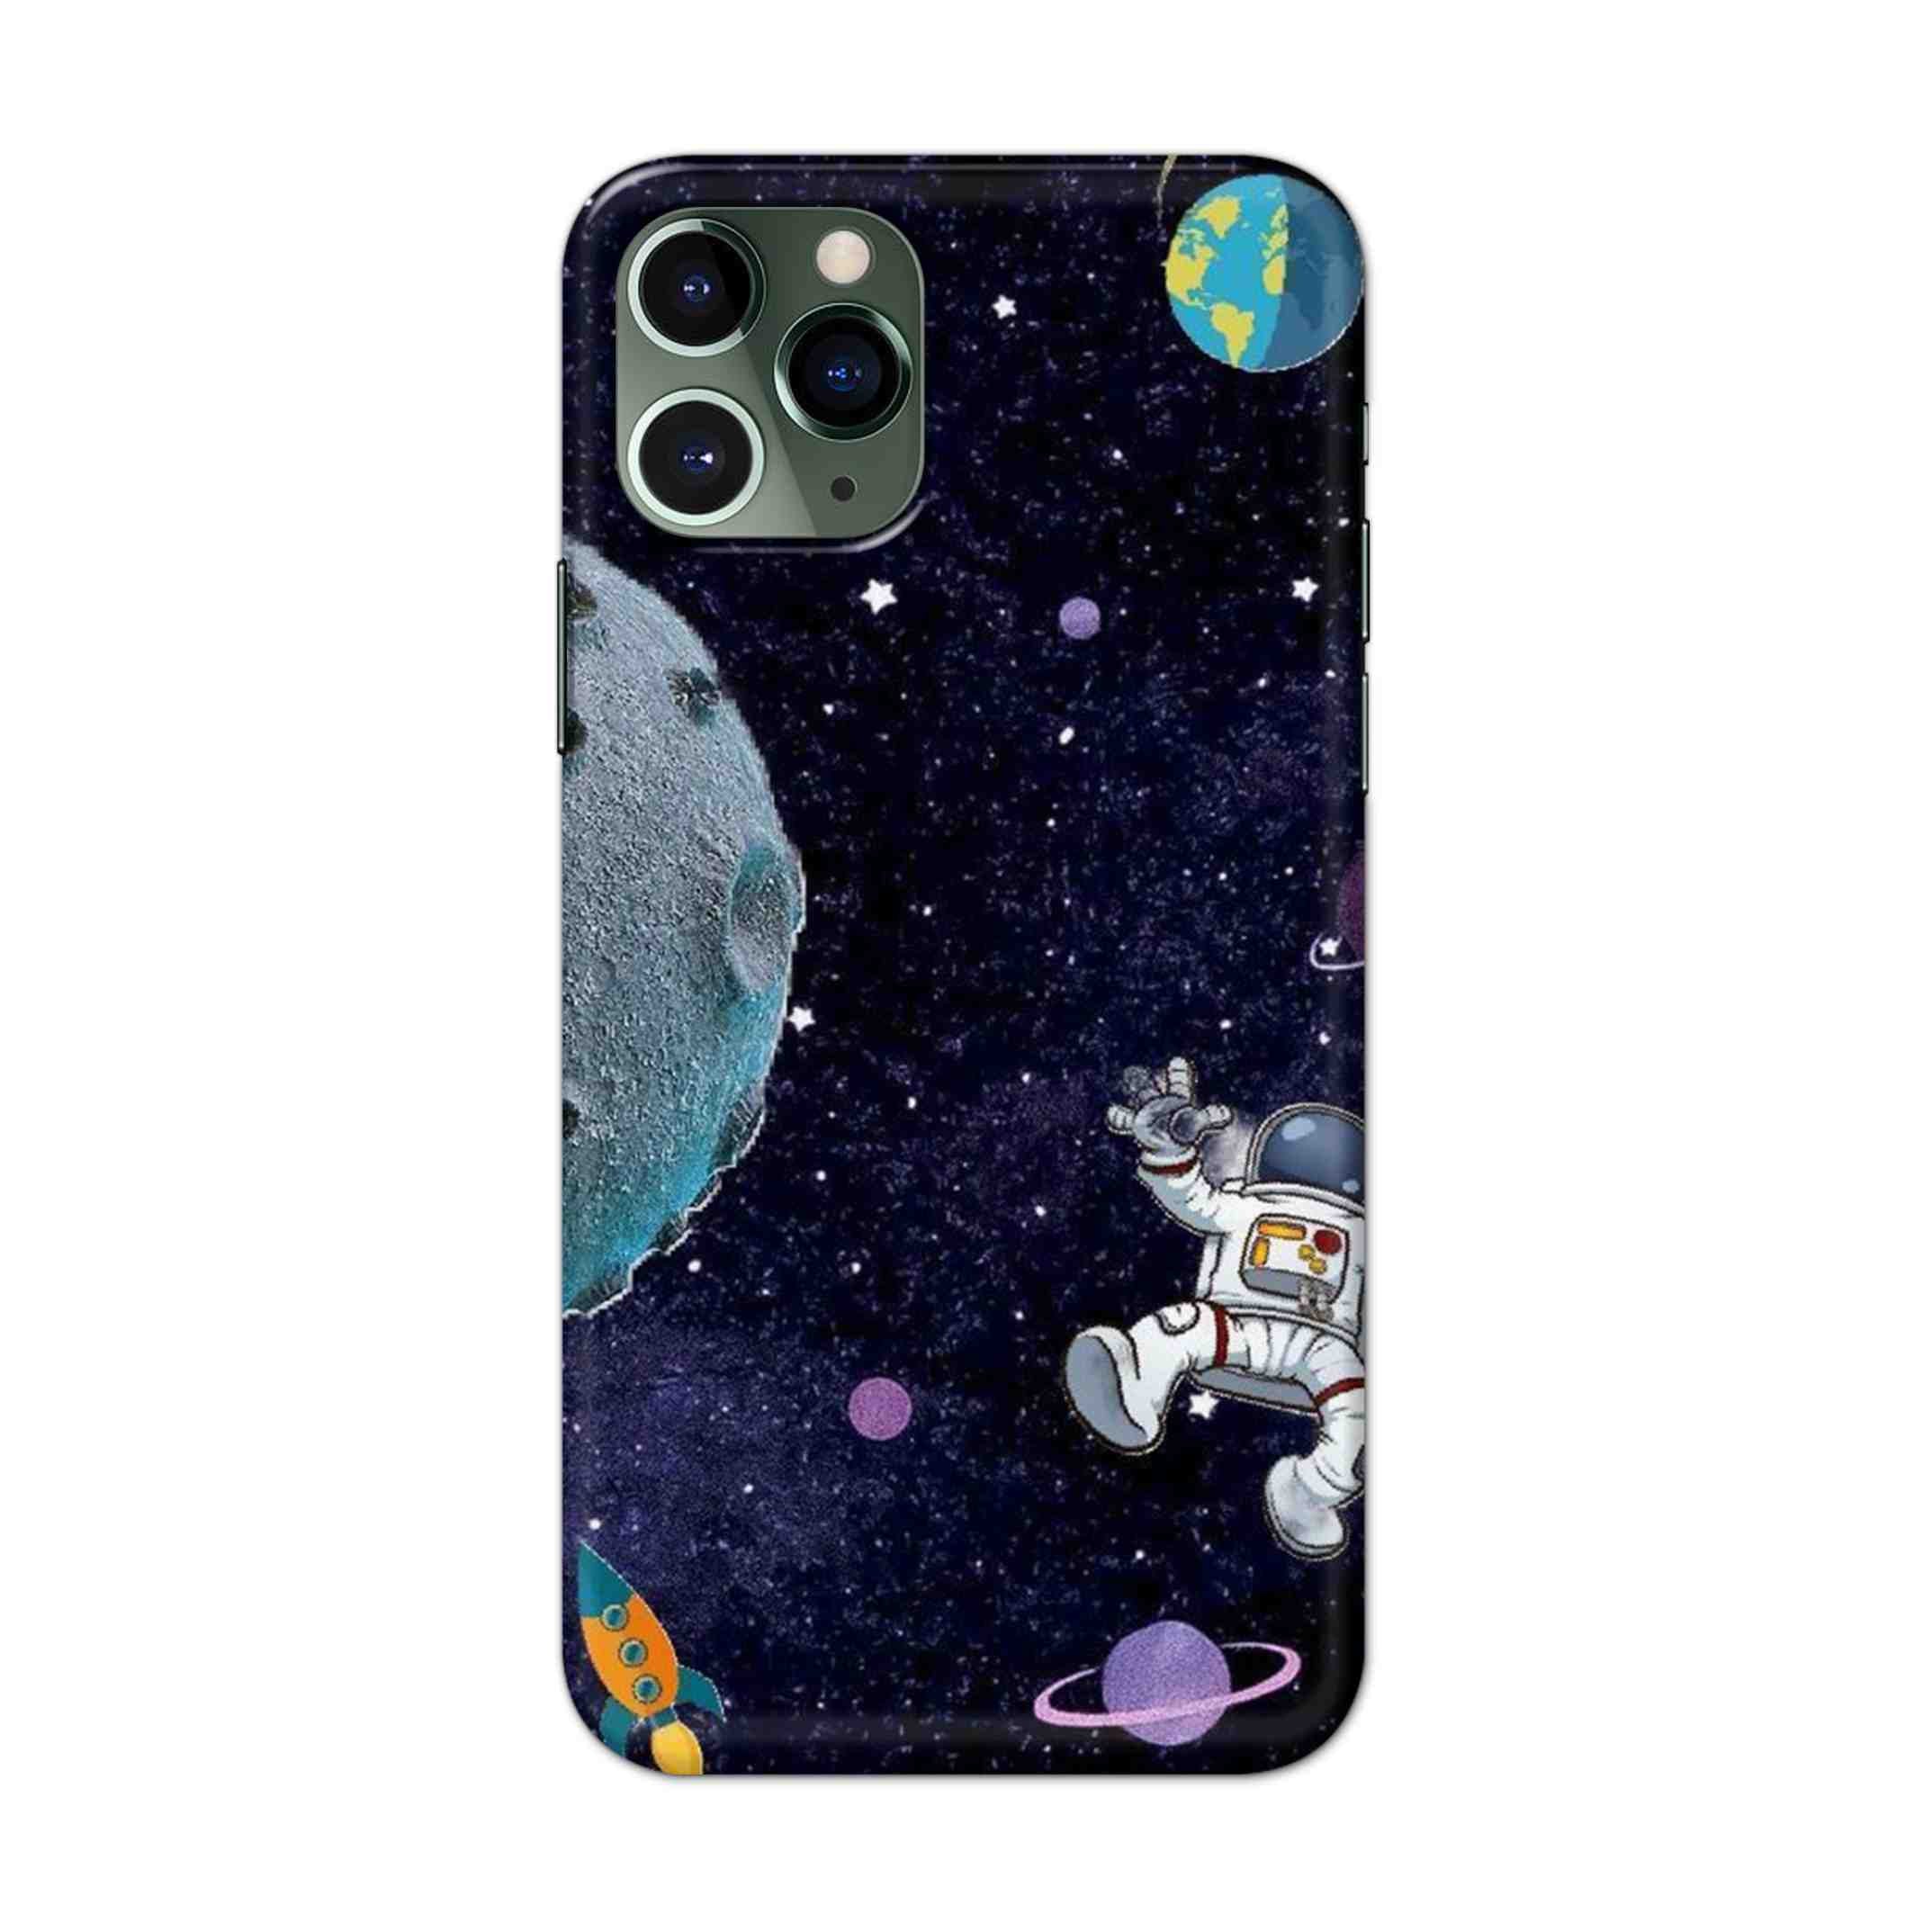 Buy Space Hard Back Mobile Phone Case/Cover For iPhone 11 Pro Online